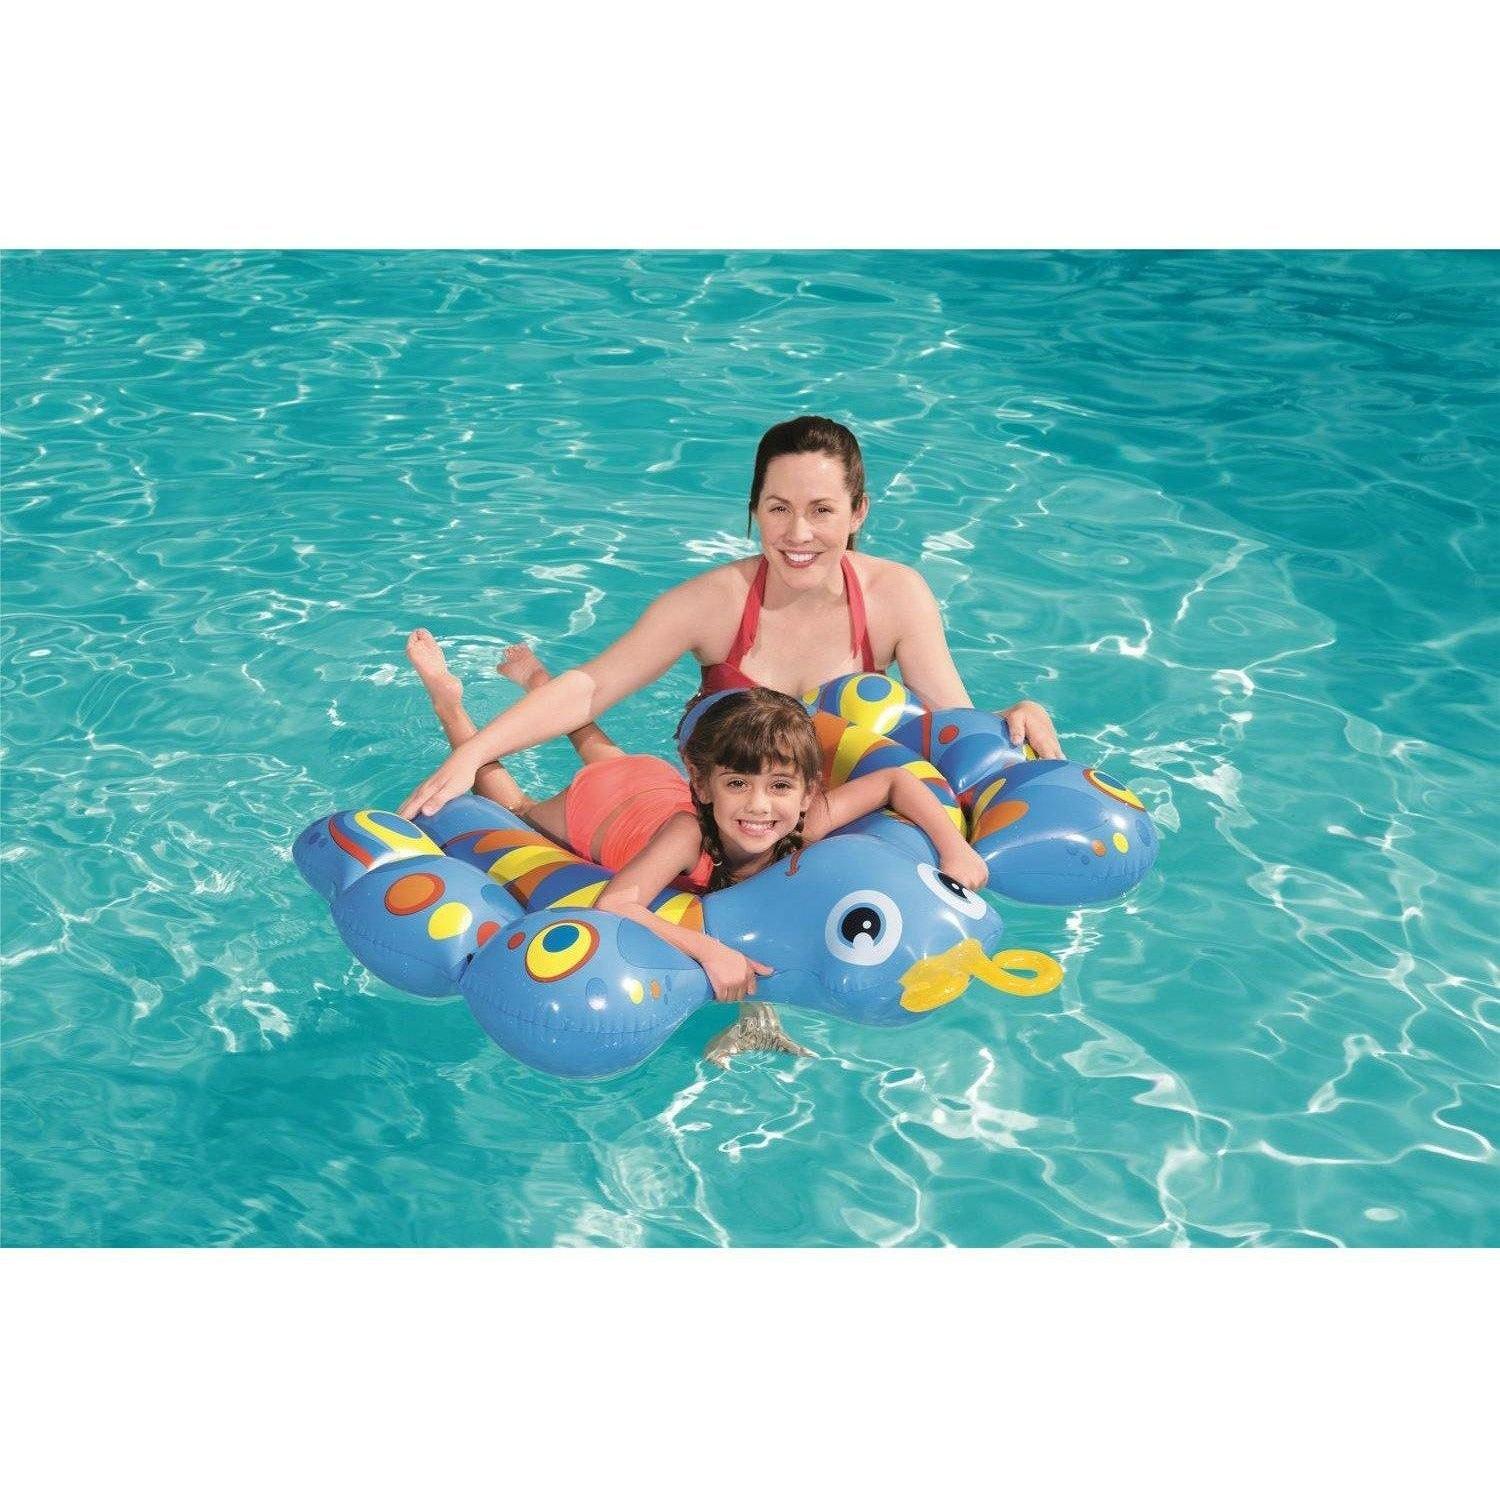 Bestway 42047 Butterfly Baby Float 91 cm - Blue - BumbleToys - 5-7 Years, 8-13 Years, Eagle Plus, Floaters, Girls, Sand Toys Pools & Inflatables